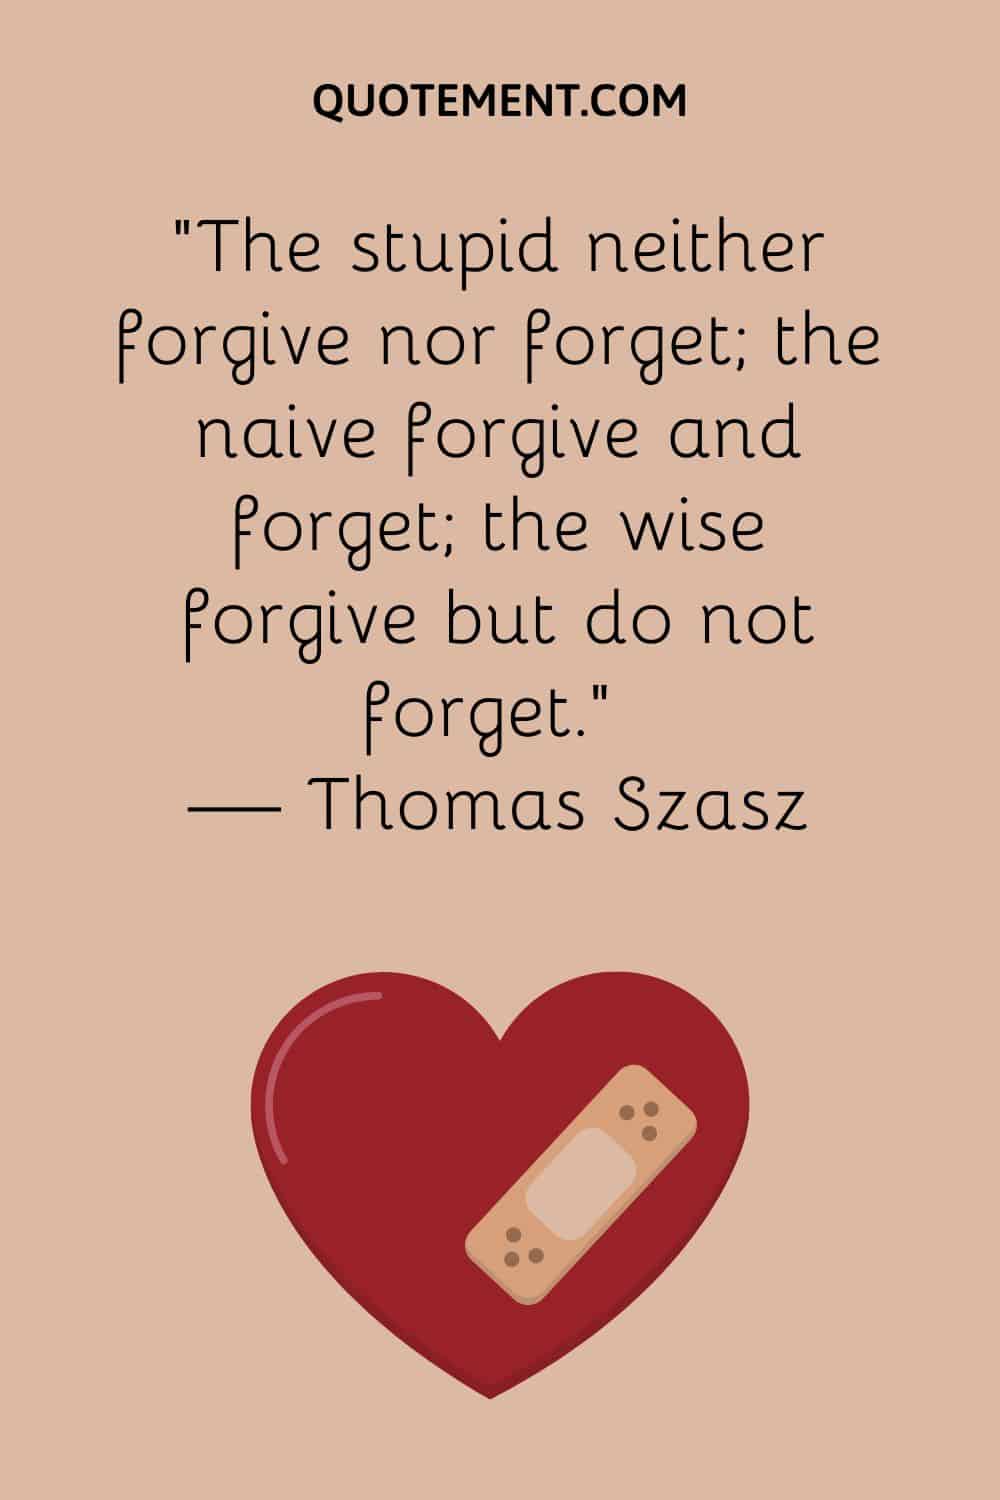 The stupid neither forgive nor forget